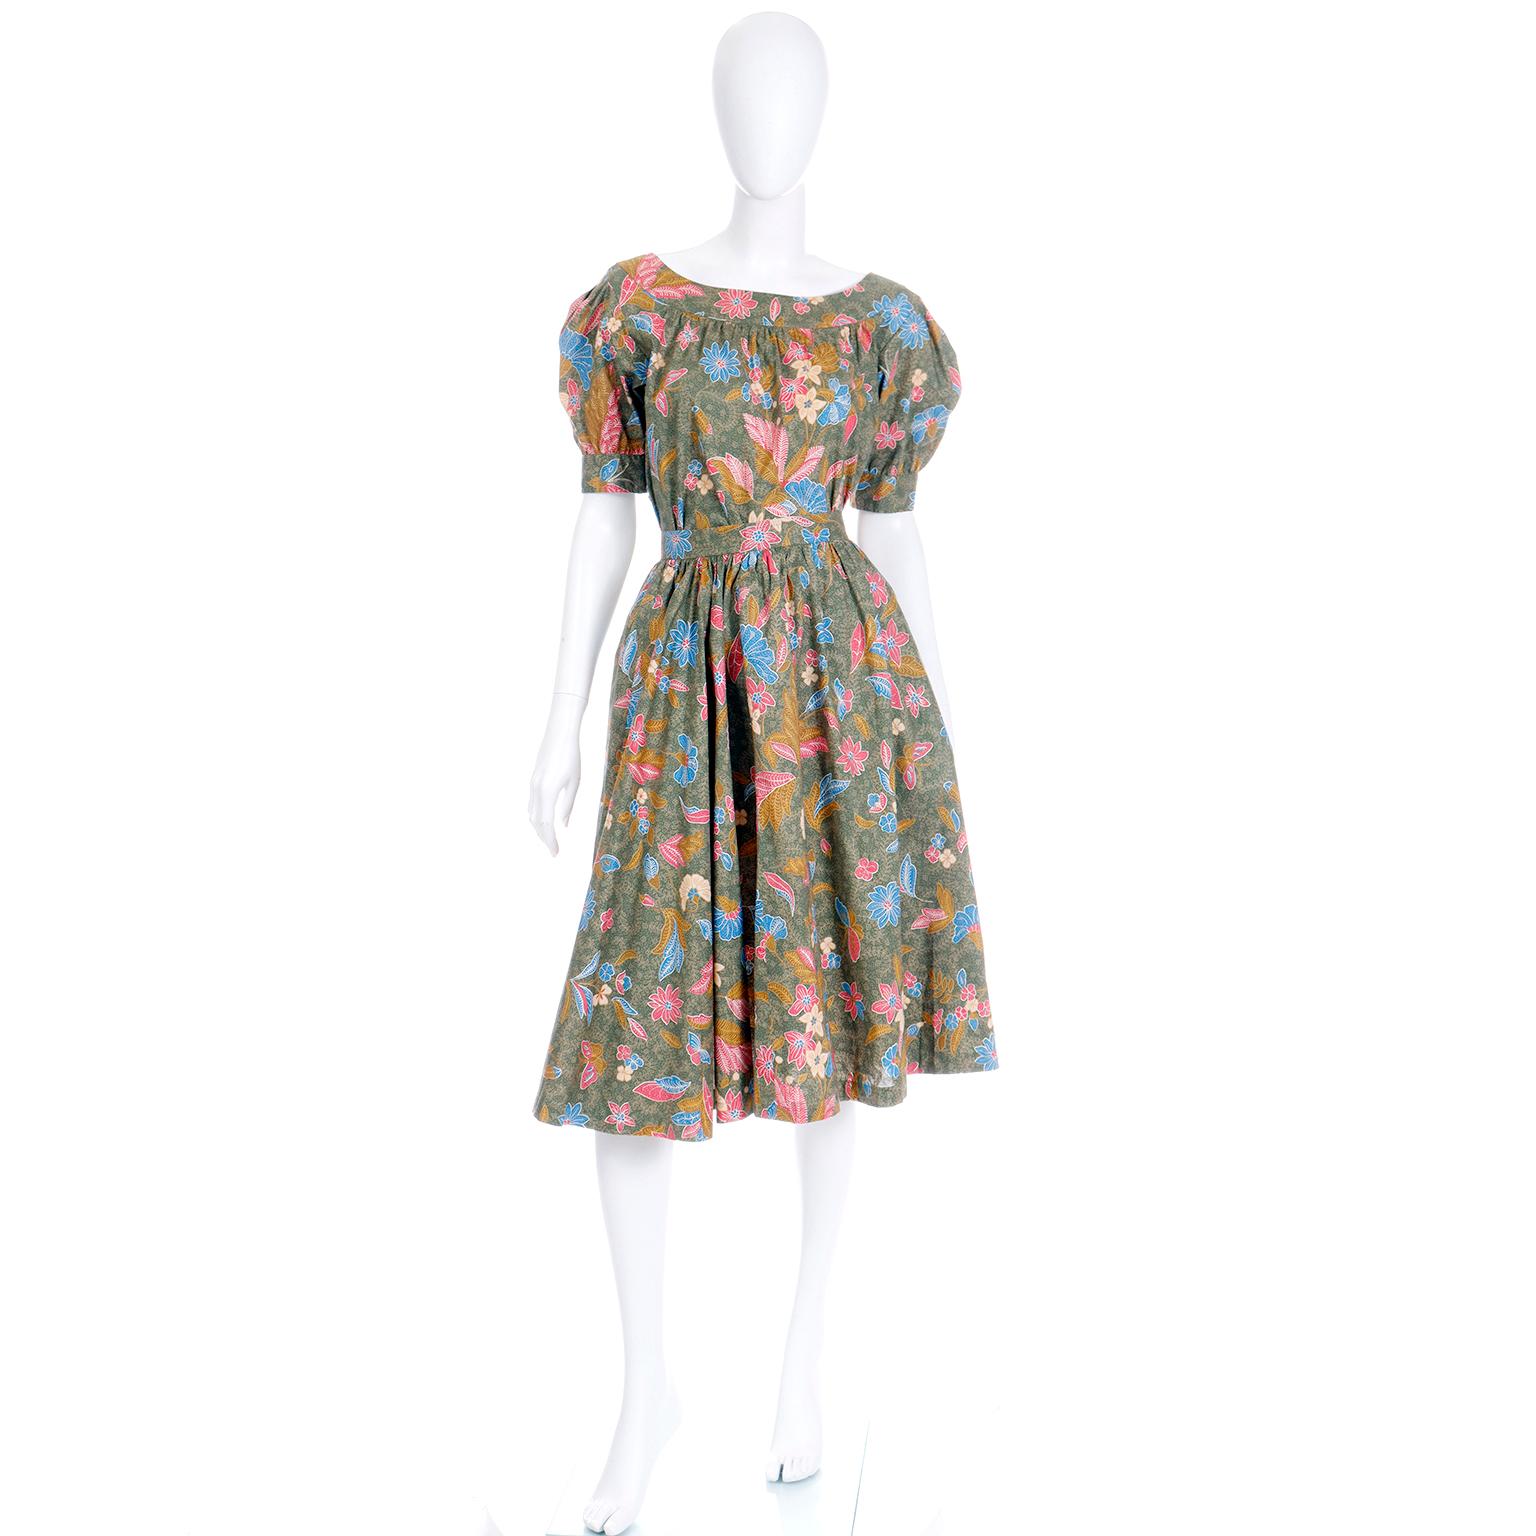 This is a gorgeous floral and butterfly print two piece day dress from the Yves Saint Laurent Spring/Summer 1986 collection. The matching top and skirt set look like a dress when worn together, but can be worn separately. It is olive green cotton,